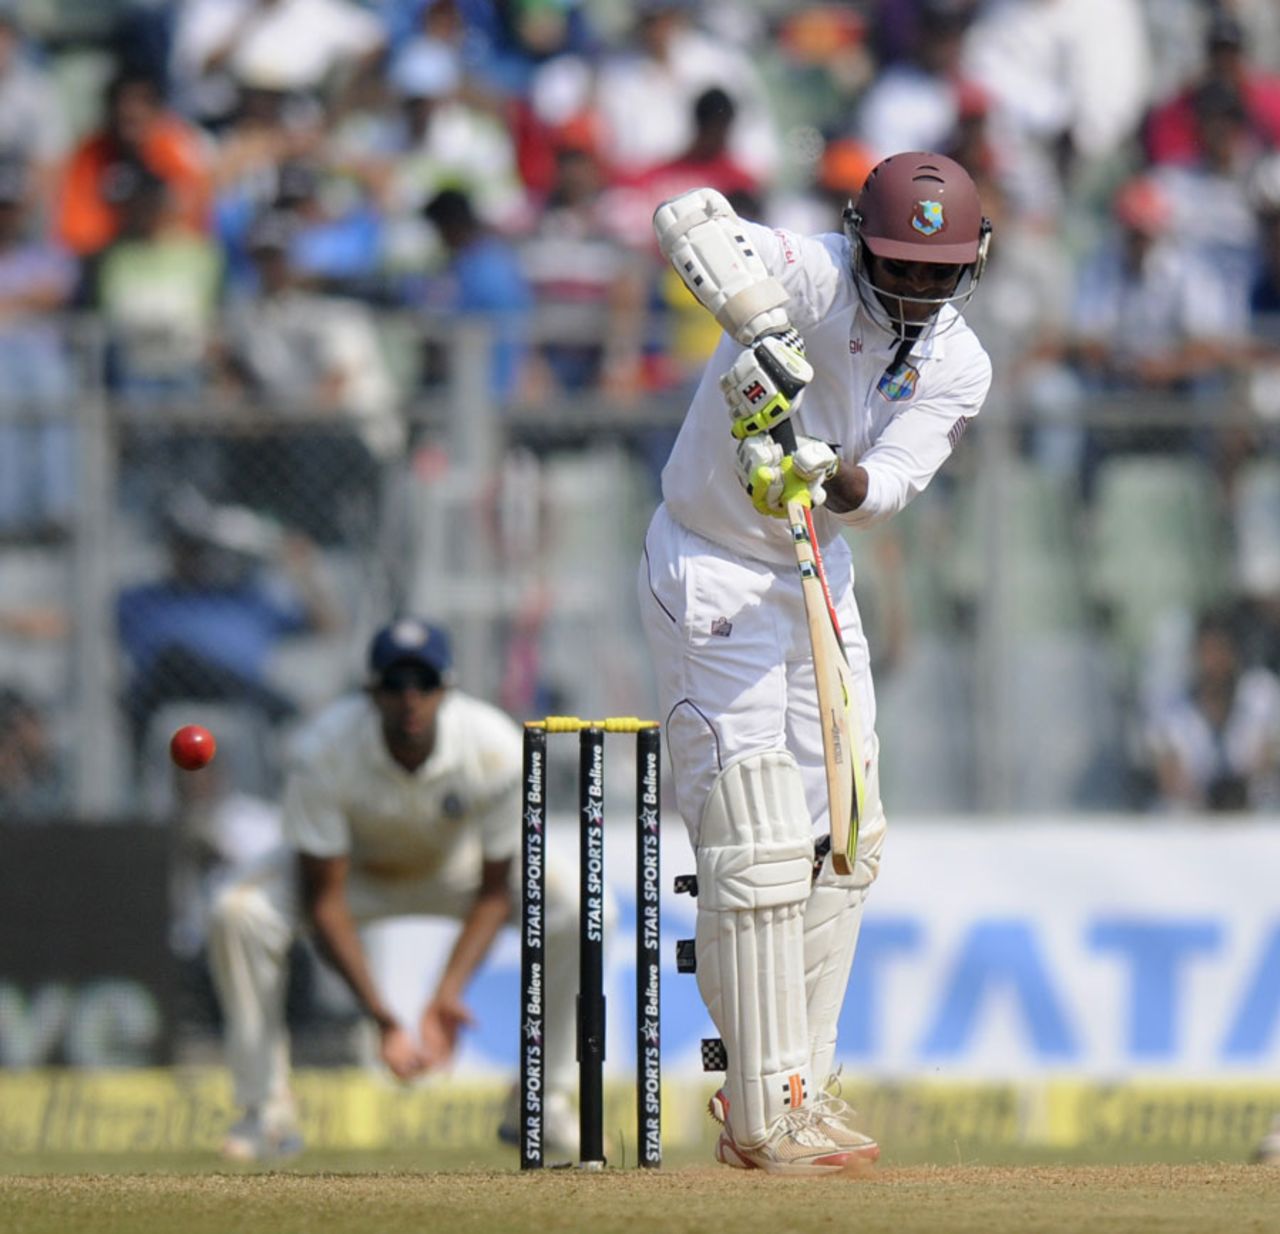 Shivnarine Chanderpaul resisted with 41, India v West Indies, 2nd Test, Mumbai, 3rd day, November 16, 2013